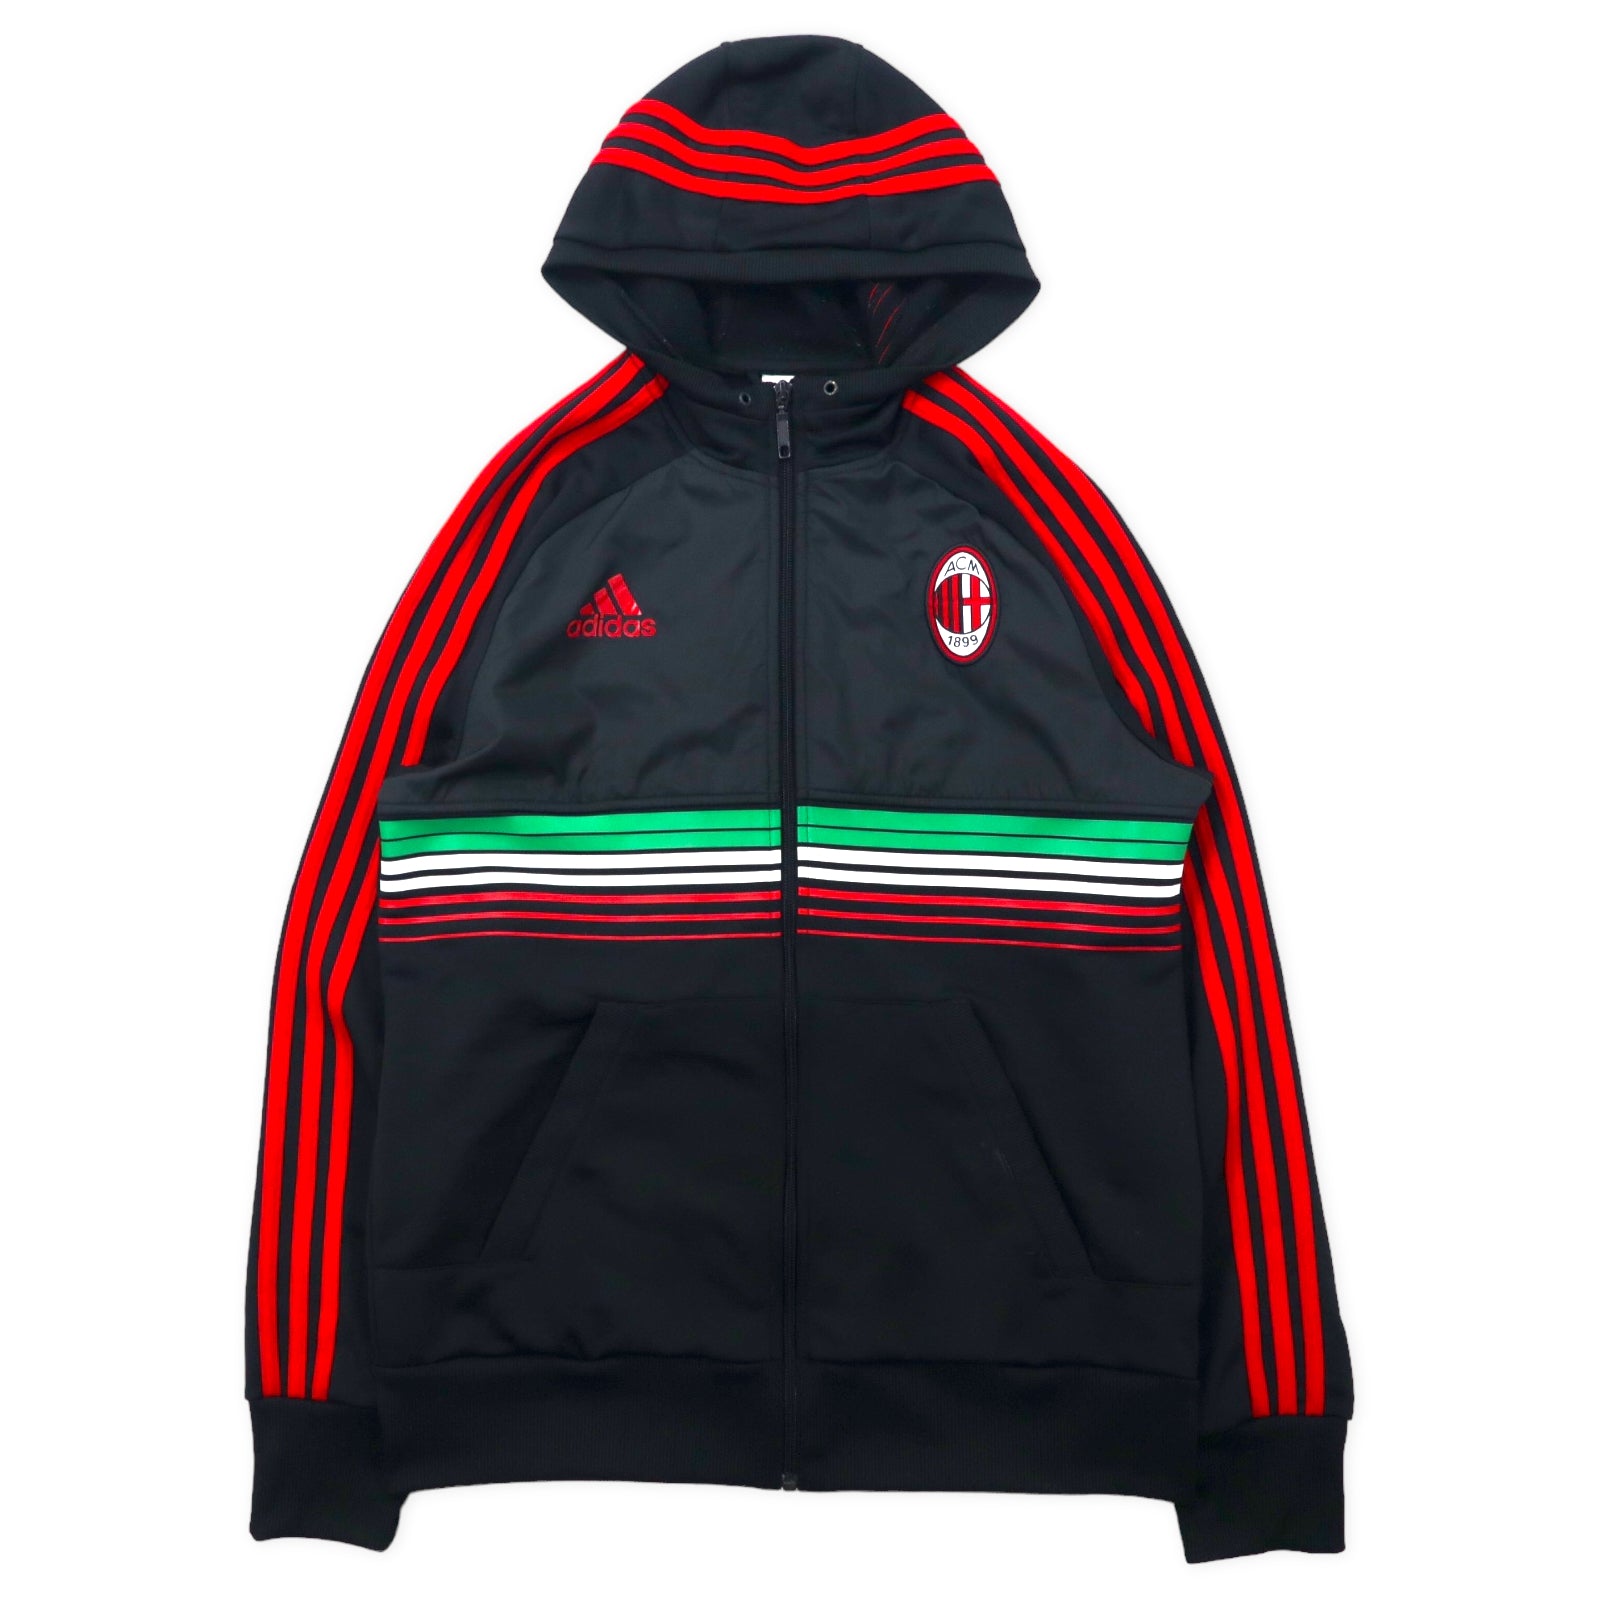 Adidas Track Jacket Jersey HOODIE O Black Red Polyester 3 Striped